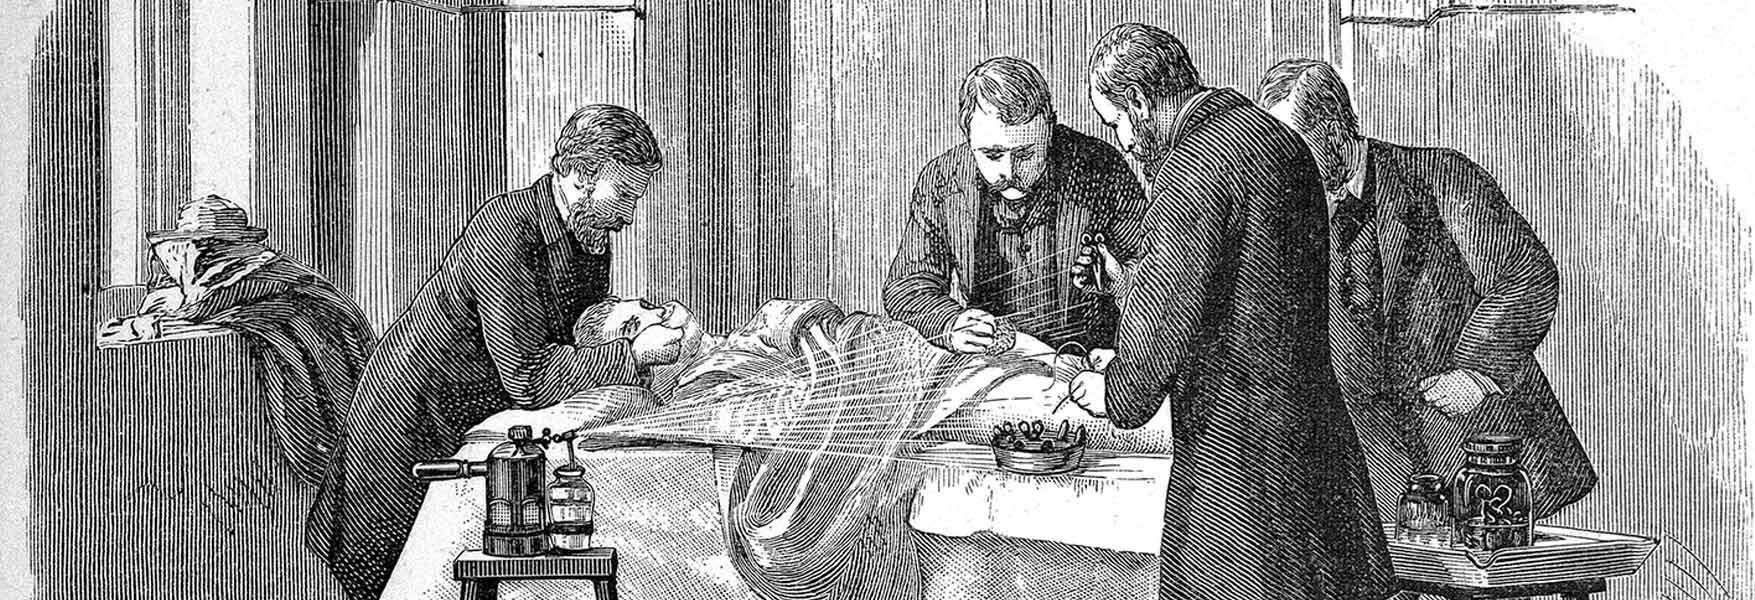 19th Century Surgery Using Antiseptic Spray By Science, 43% OFF